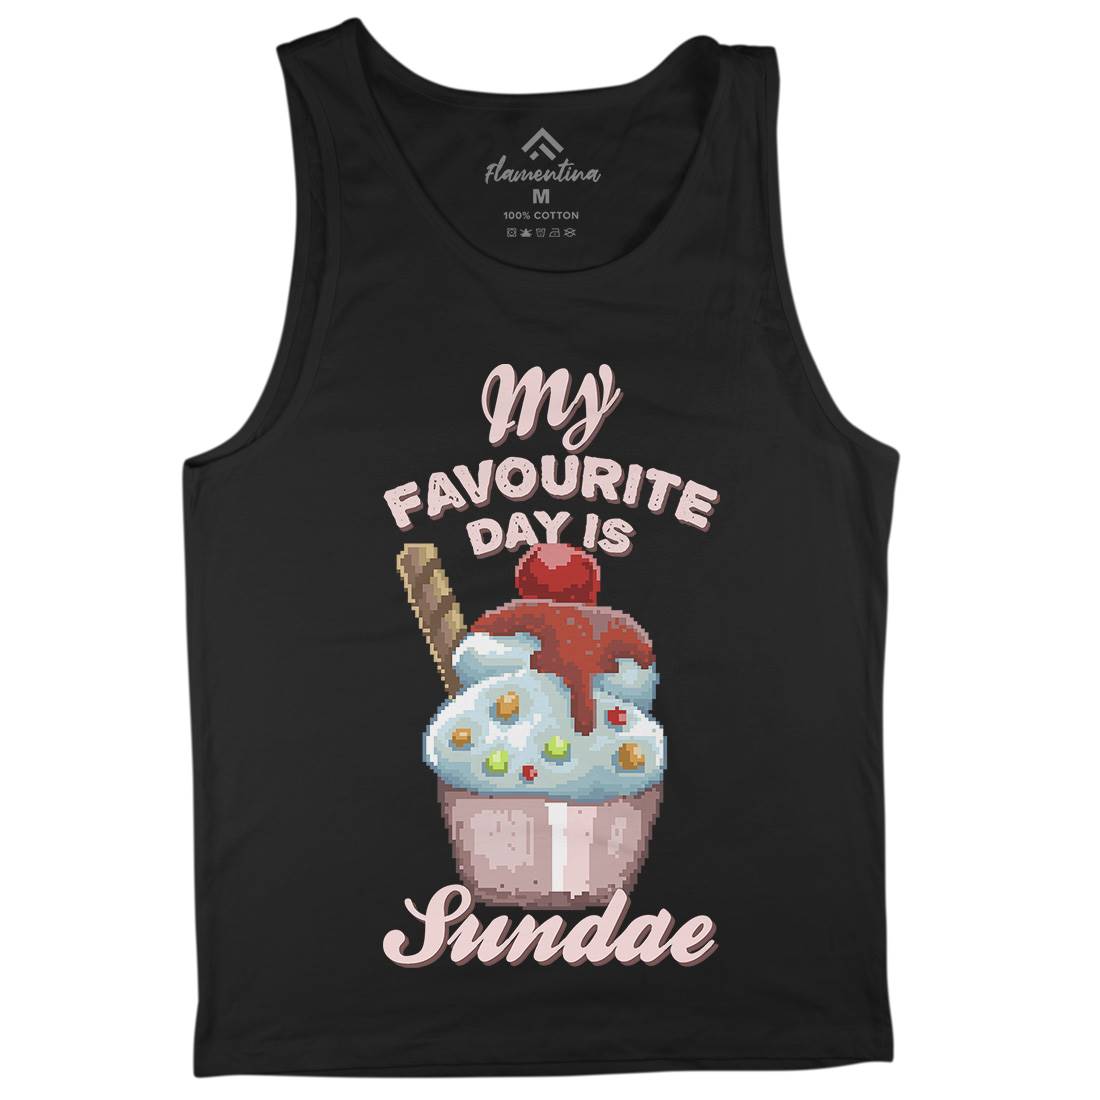 My Favourite Day Is Sundae Mens Tank Top Vest Food B936